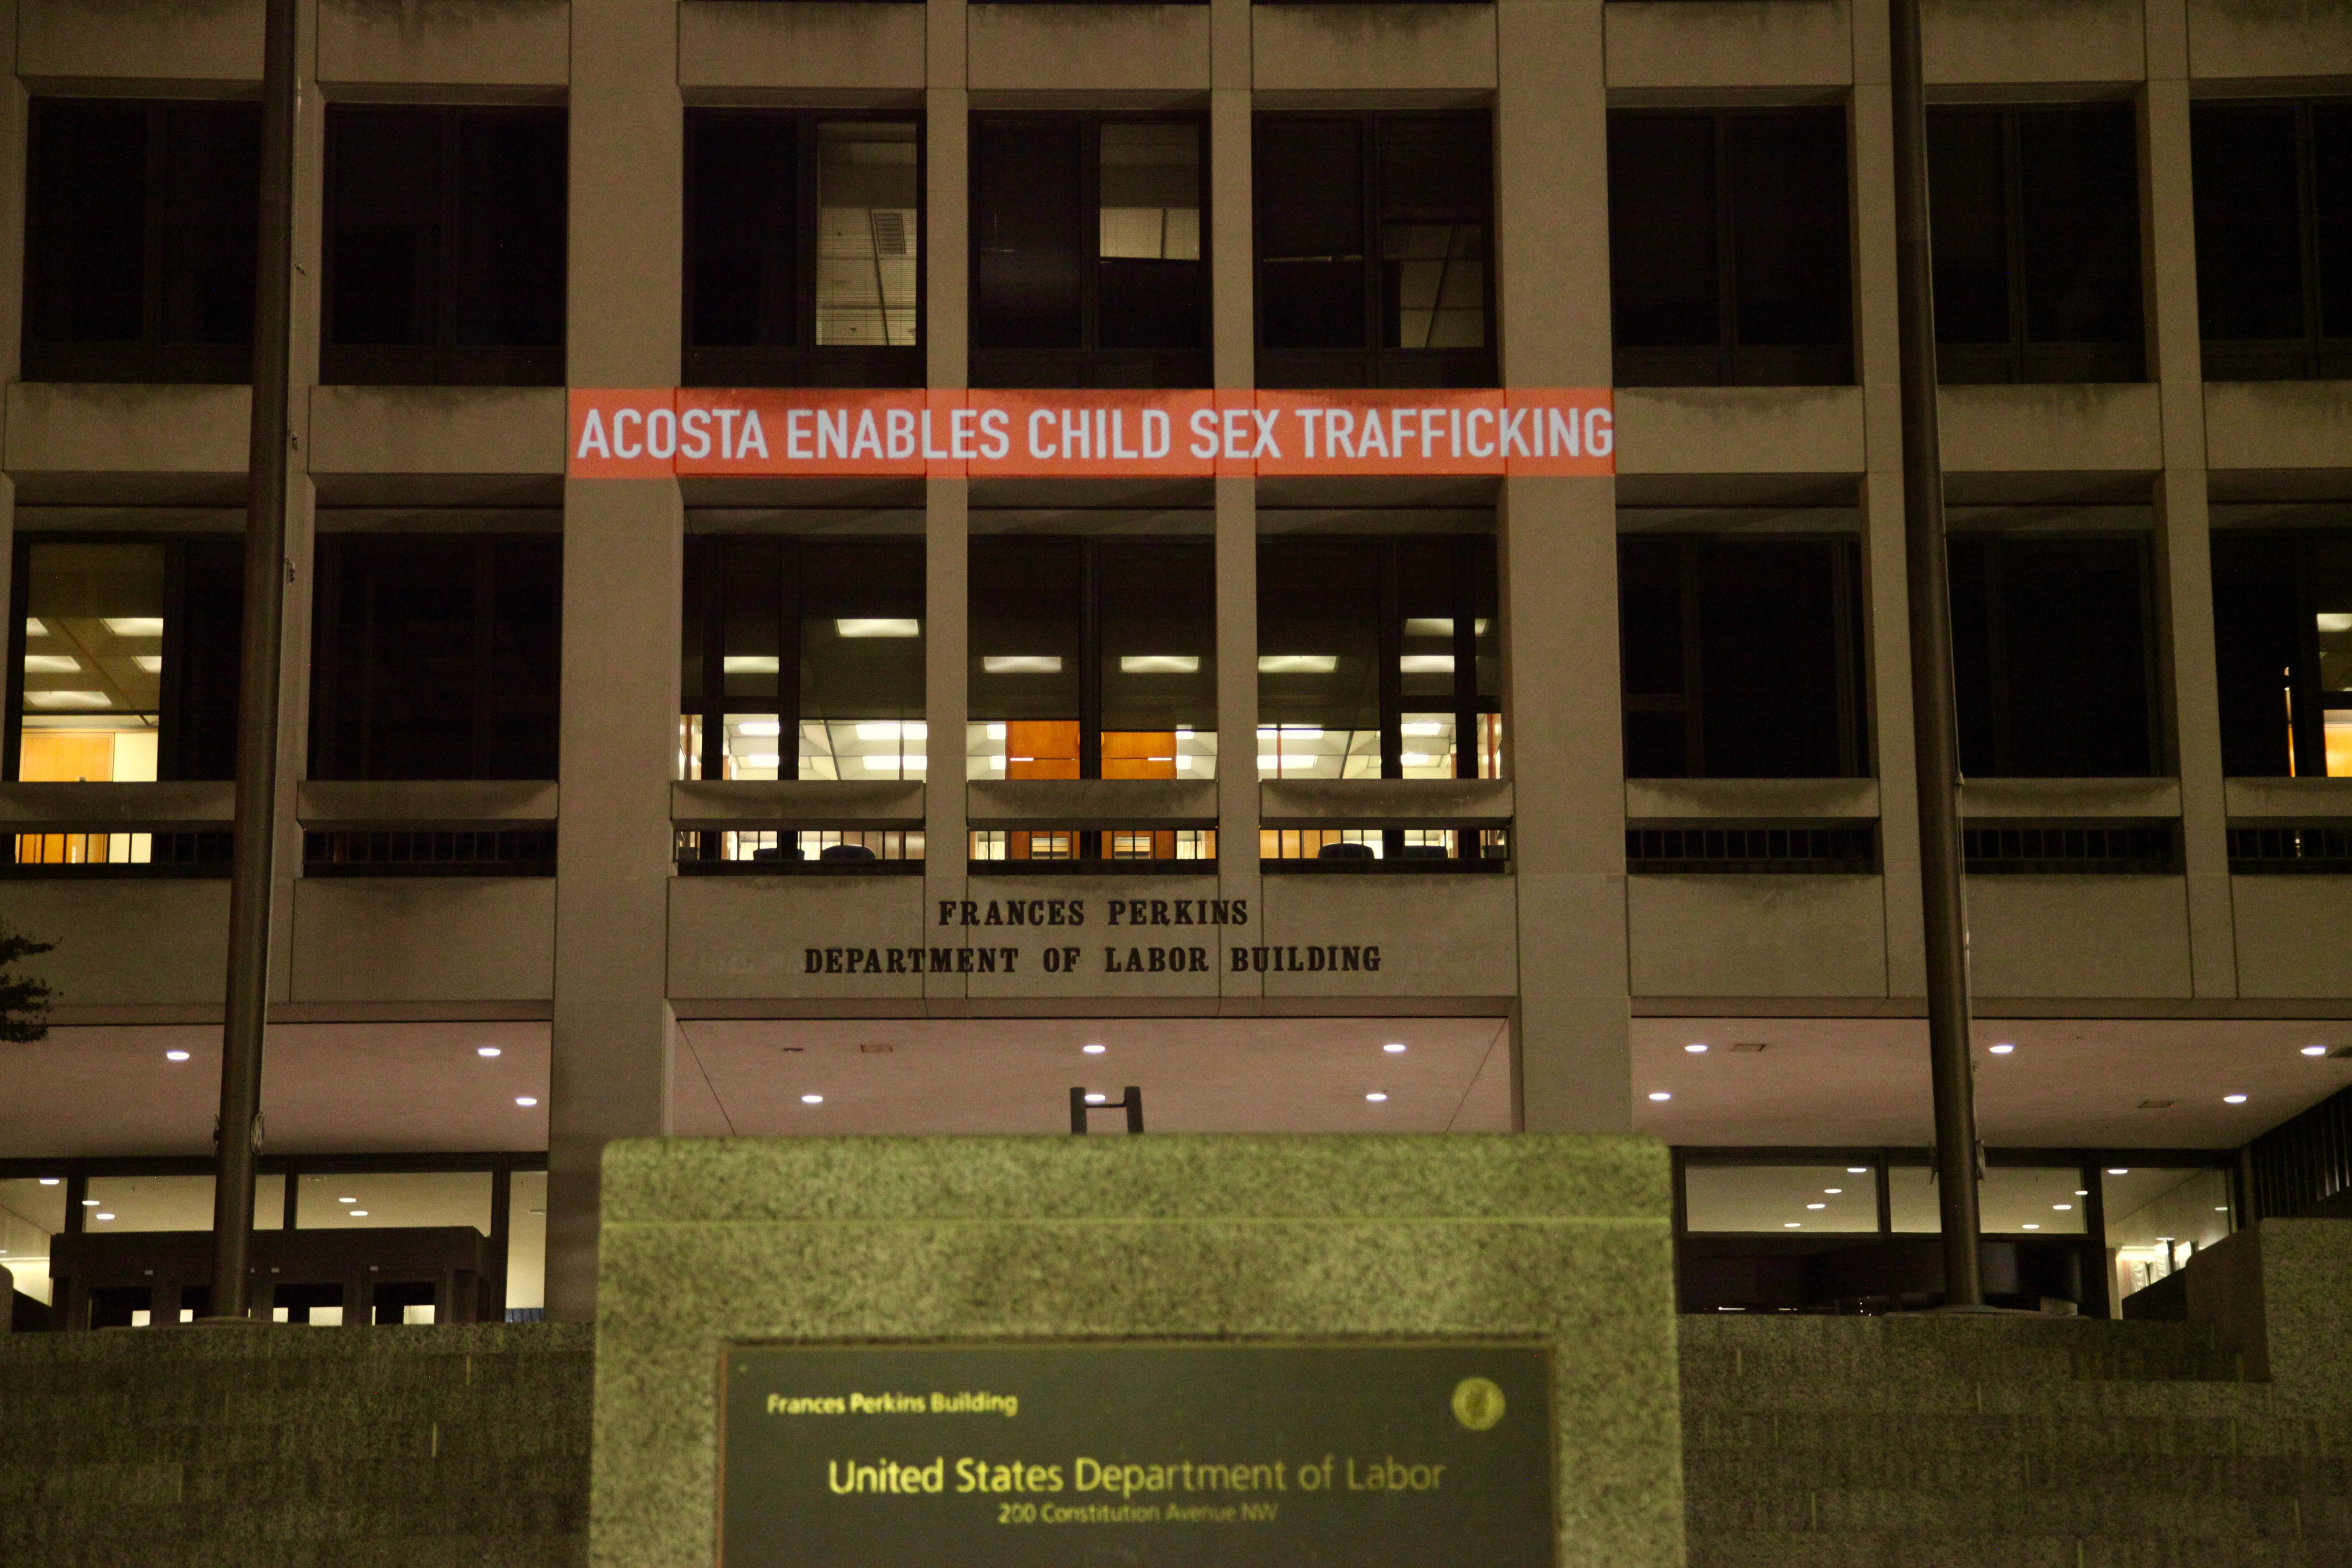 Light projection onto U.S. Department of Labor building reading, "Acosta enables child sex trafficking."